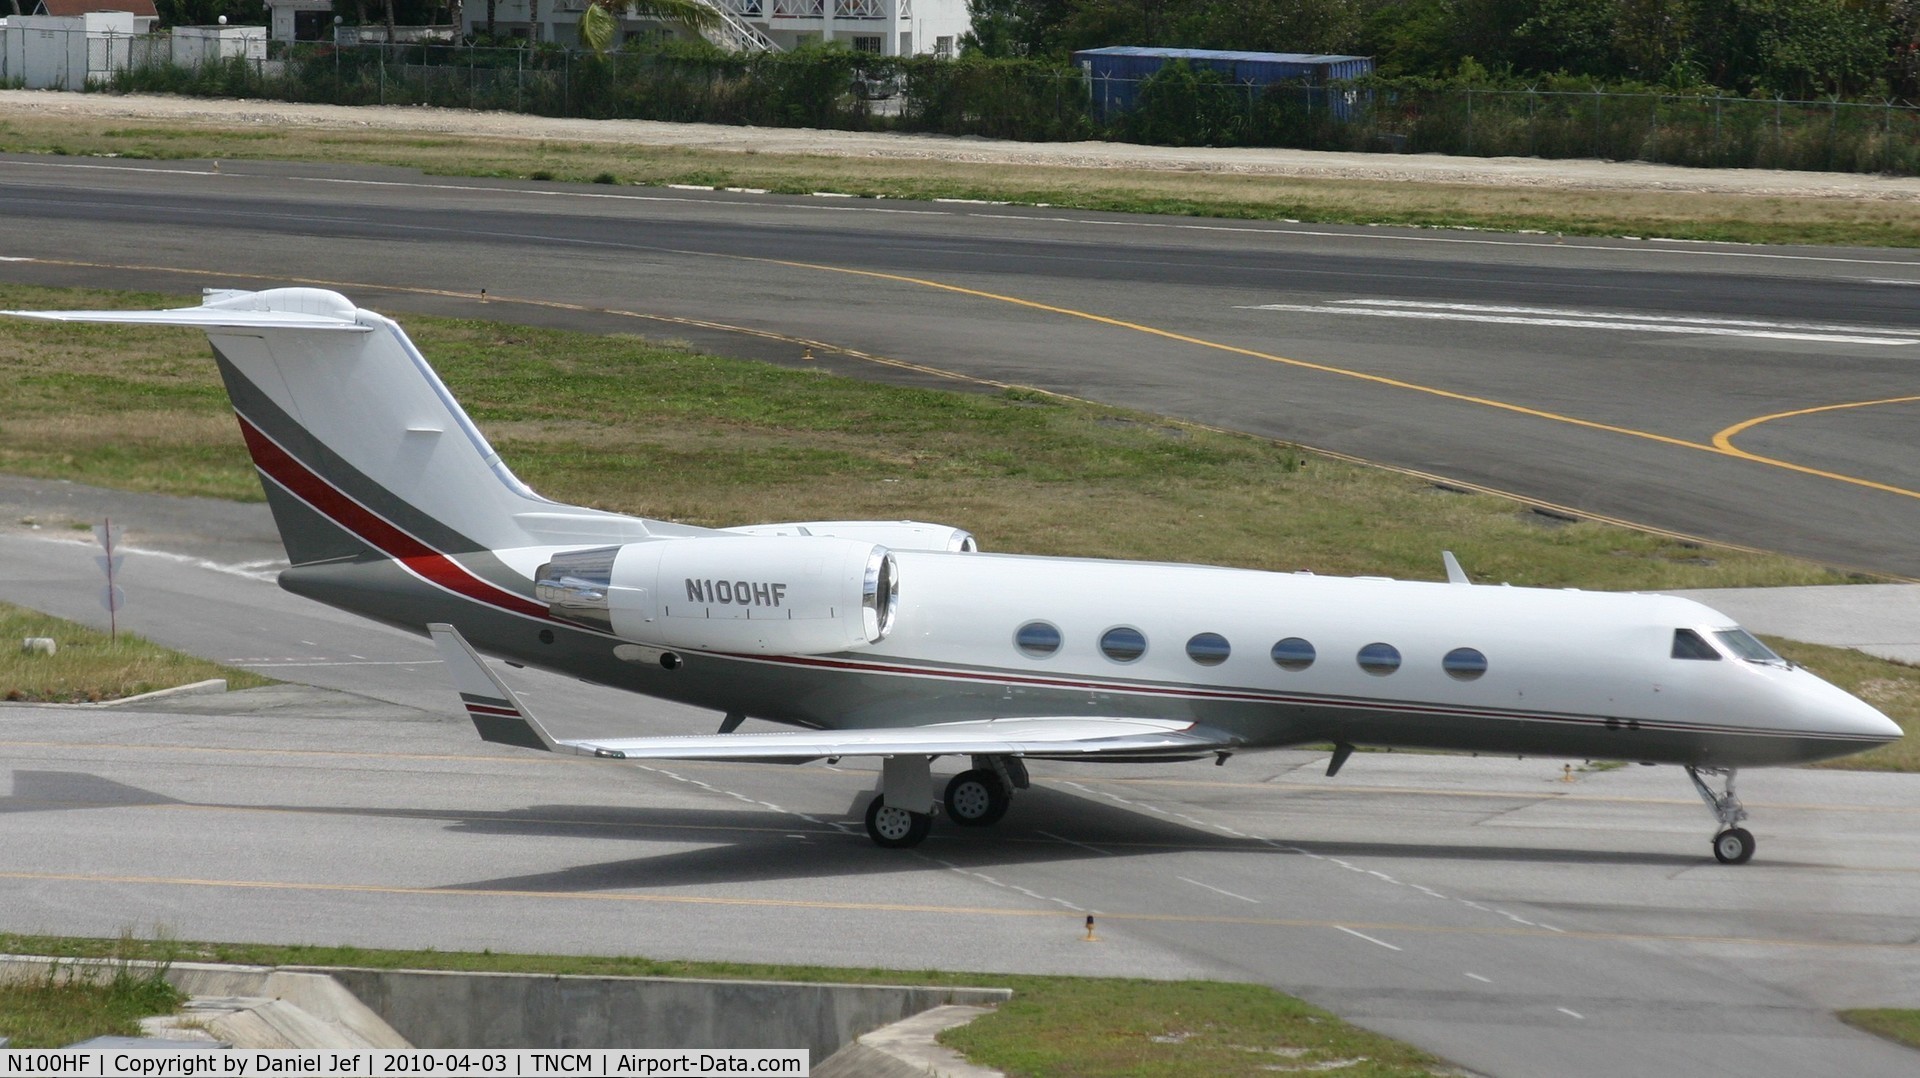 N100HF, 1998 Gulfstream Aerospace G-IV C/N 1338, N100HF taxing on the bypass for the holding point Alpha